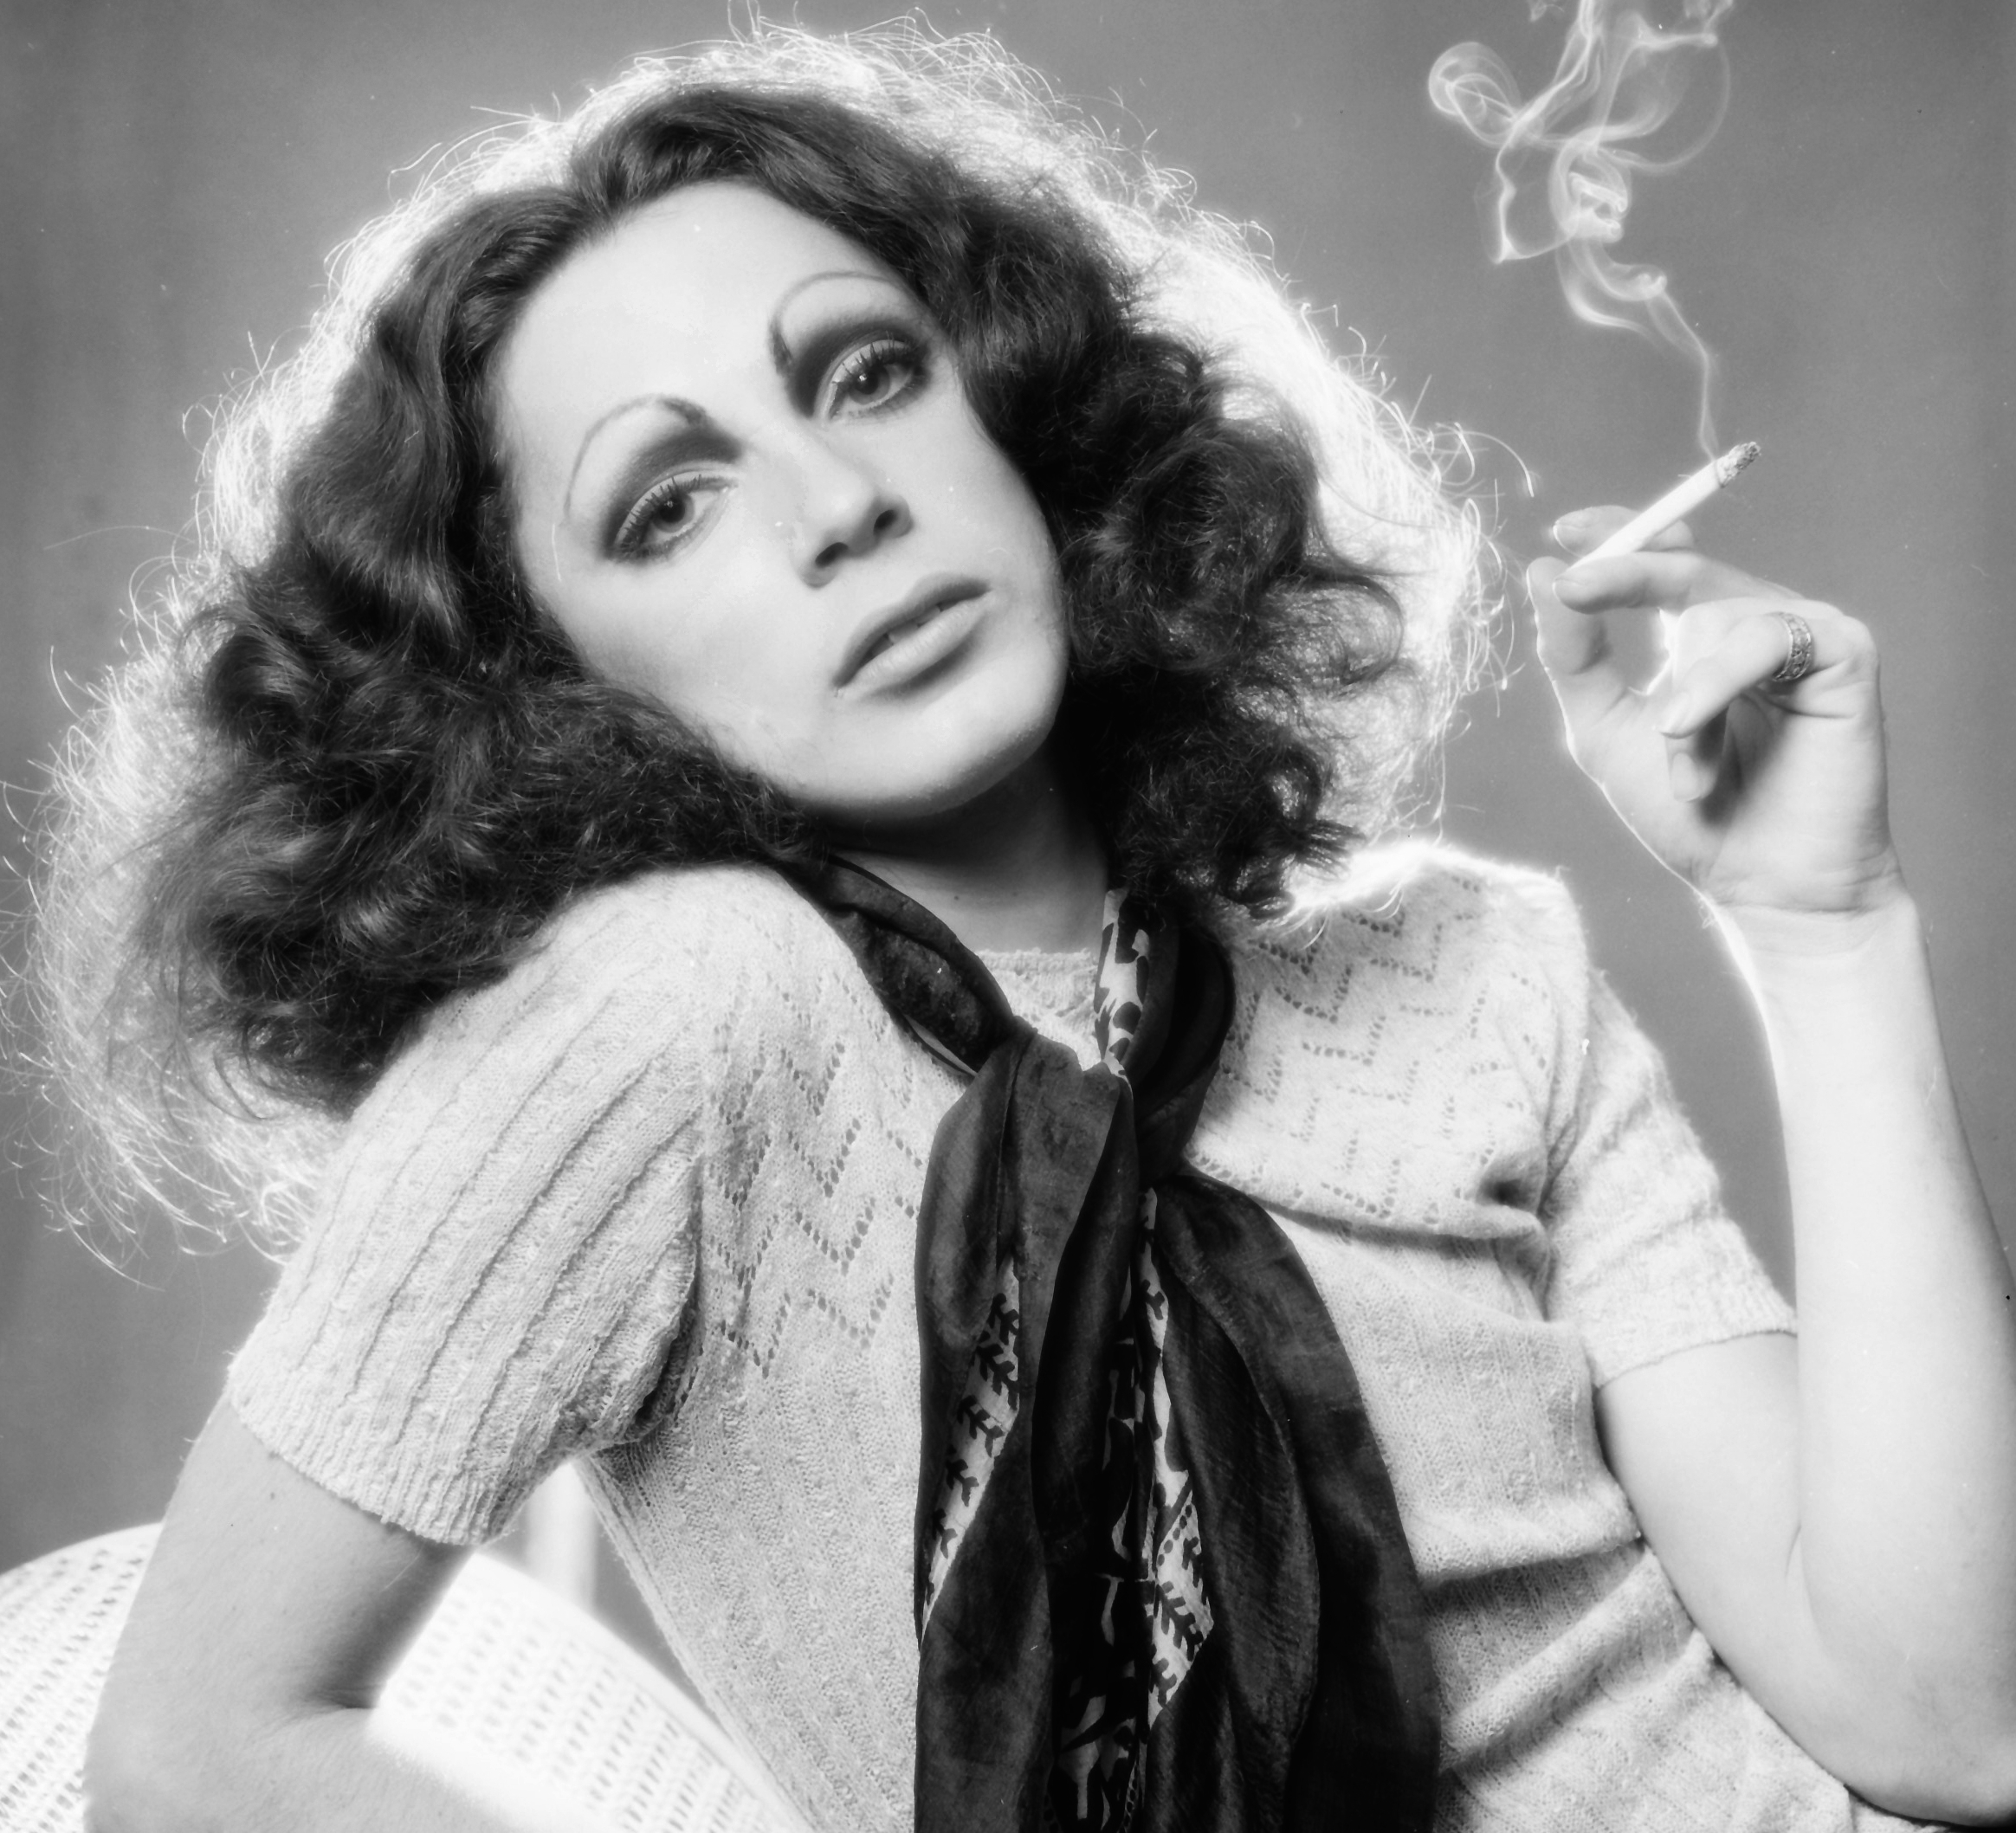 Nude Beach 69 - Holly Woodlawn, Warhol Superstar, Dead at 69 - The Gay & Lesbian Review